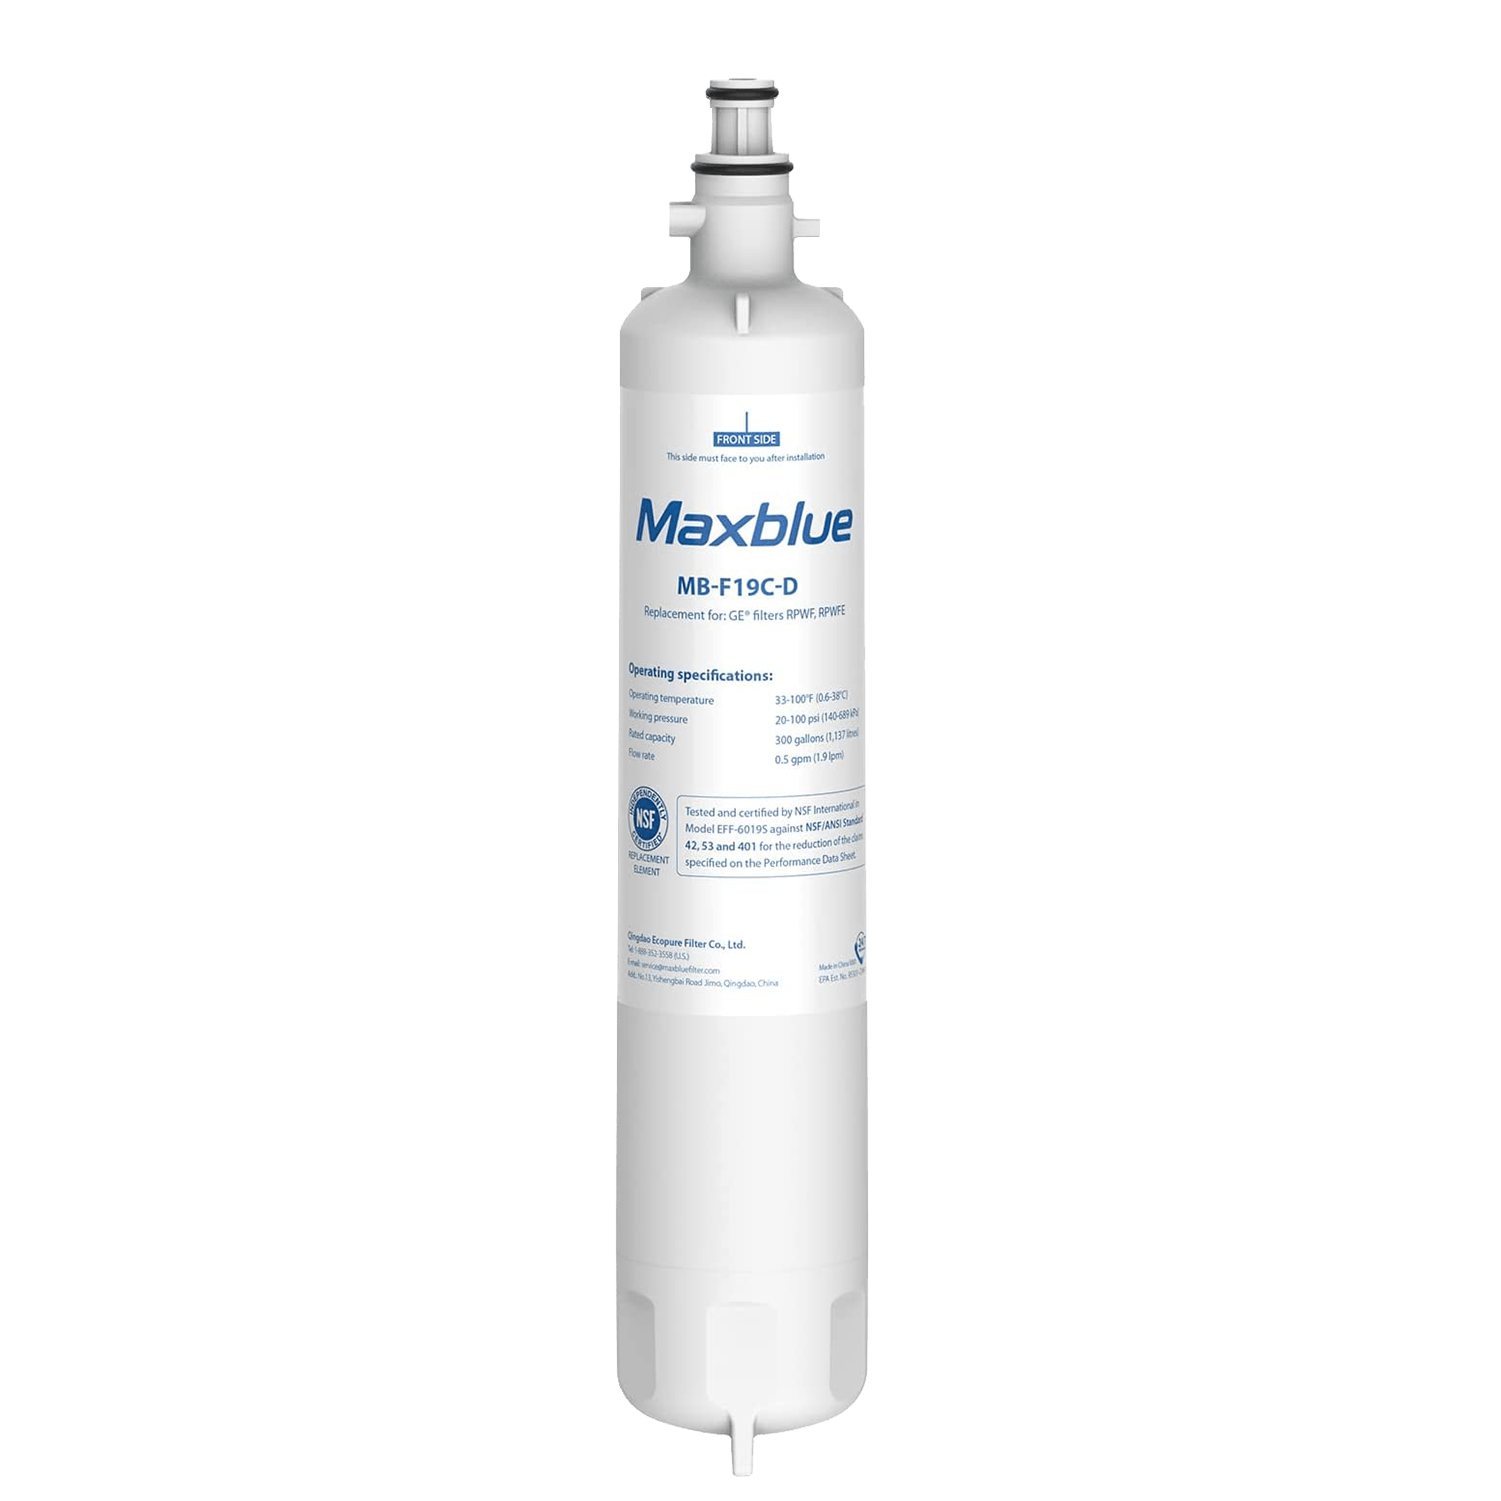 Maxblue Replacement for GE® RPWFE Refrigerator Water Filter (with CHIP)